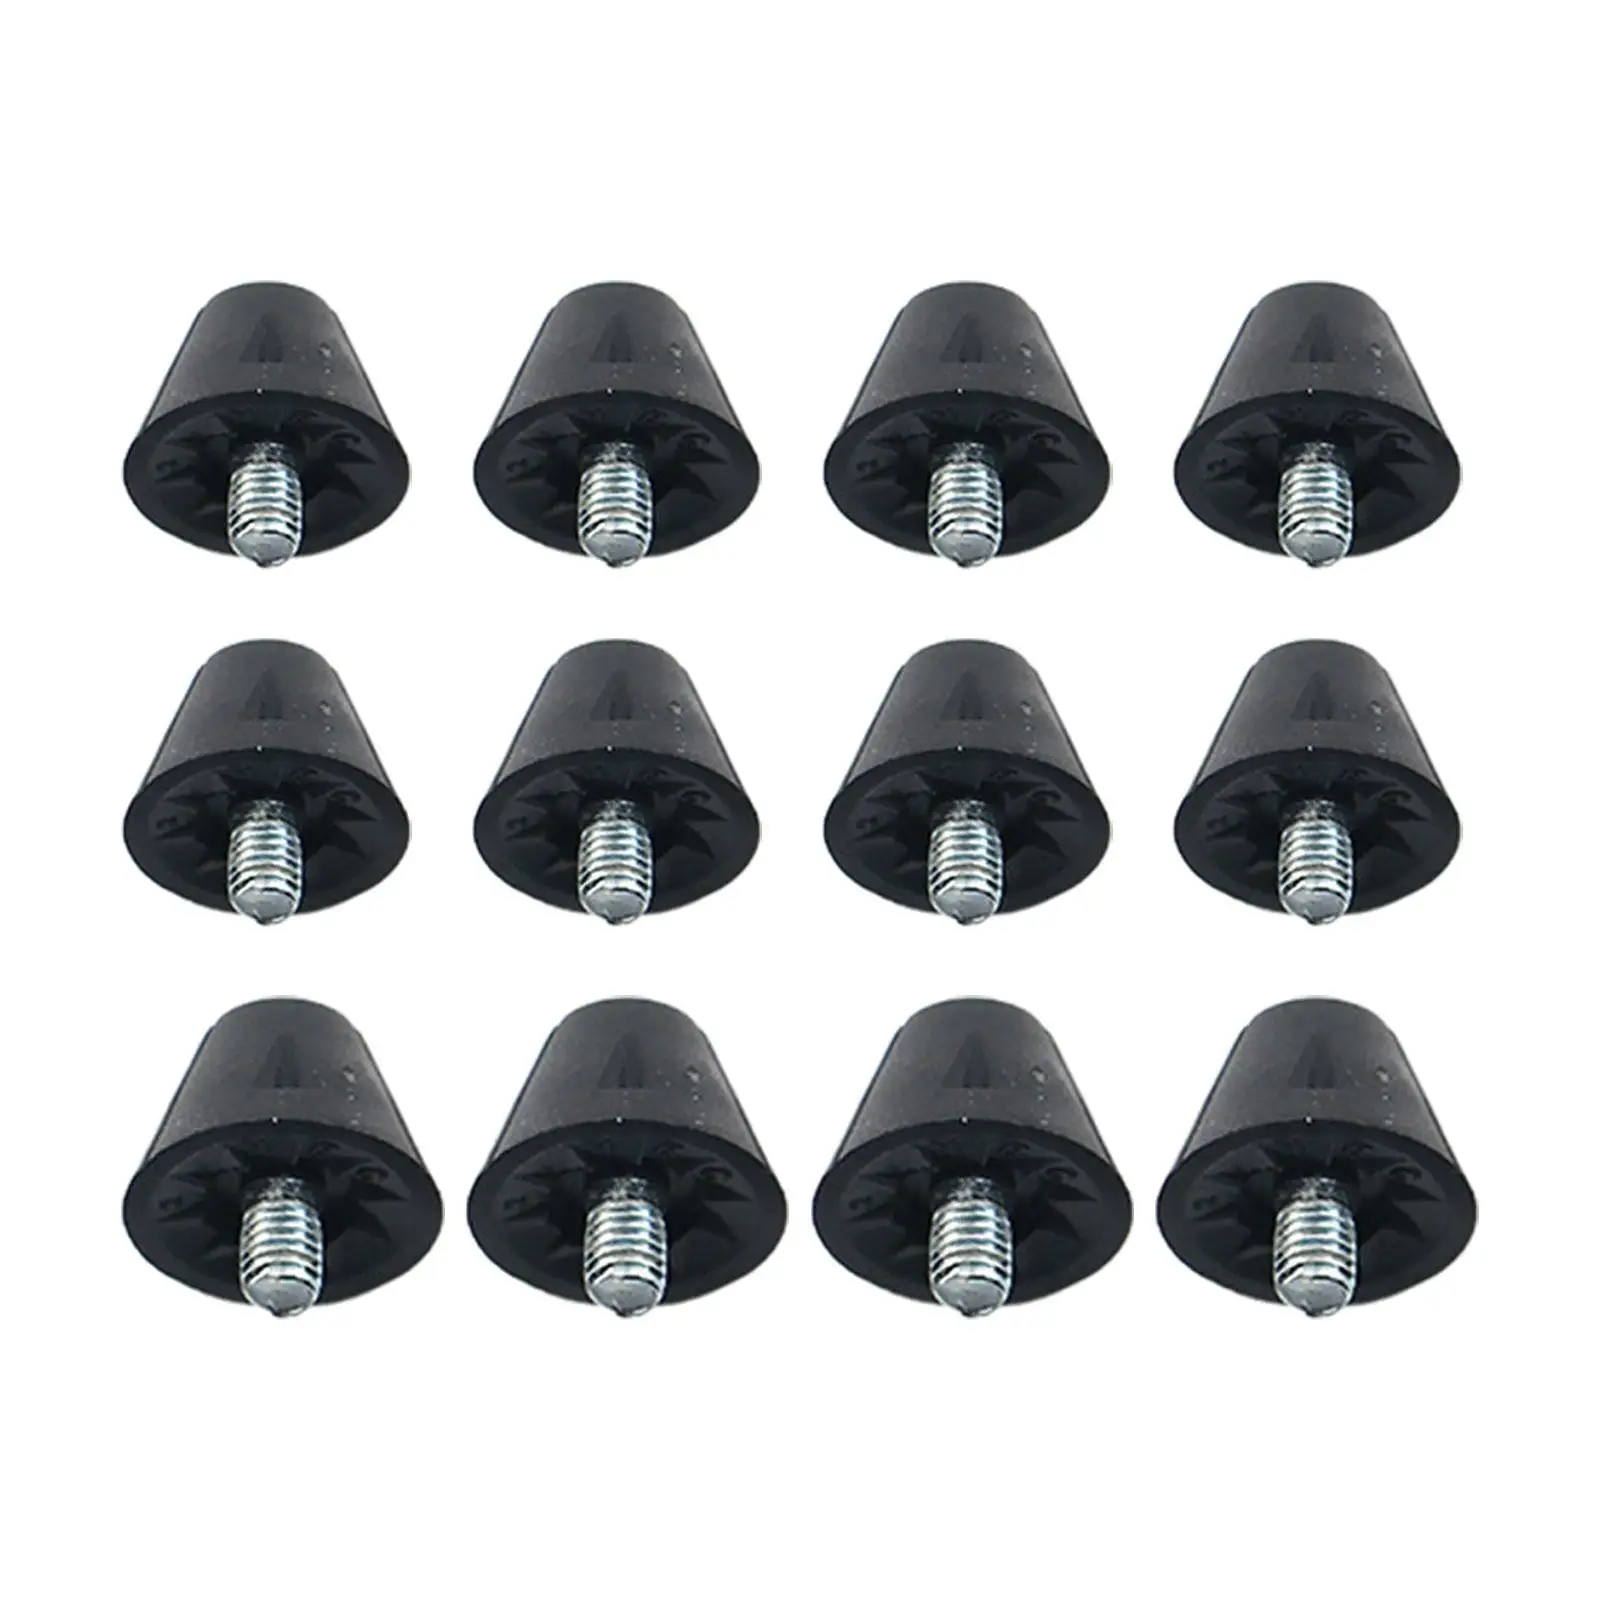 12x Football Boot Studs Portable Thread Screw 5mm Dia Replacement Spikes for Indoor Outdoor Sports Athletic Sneakers Training